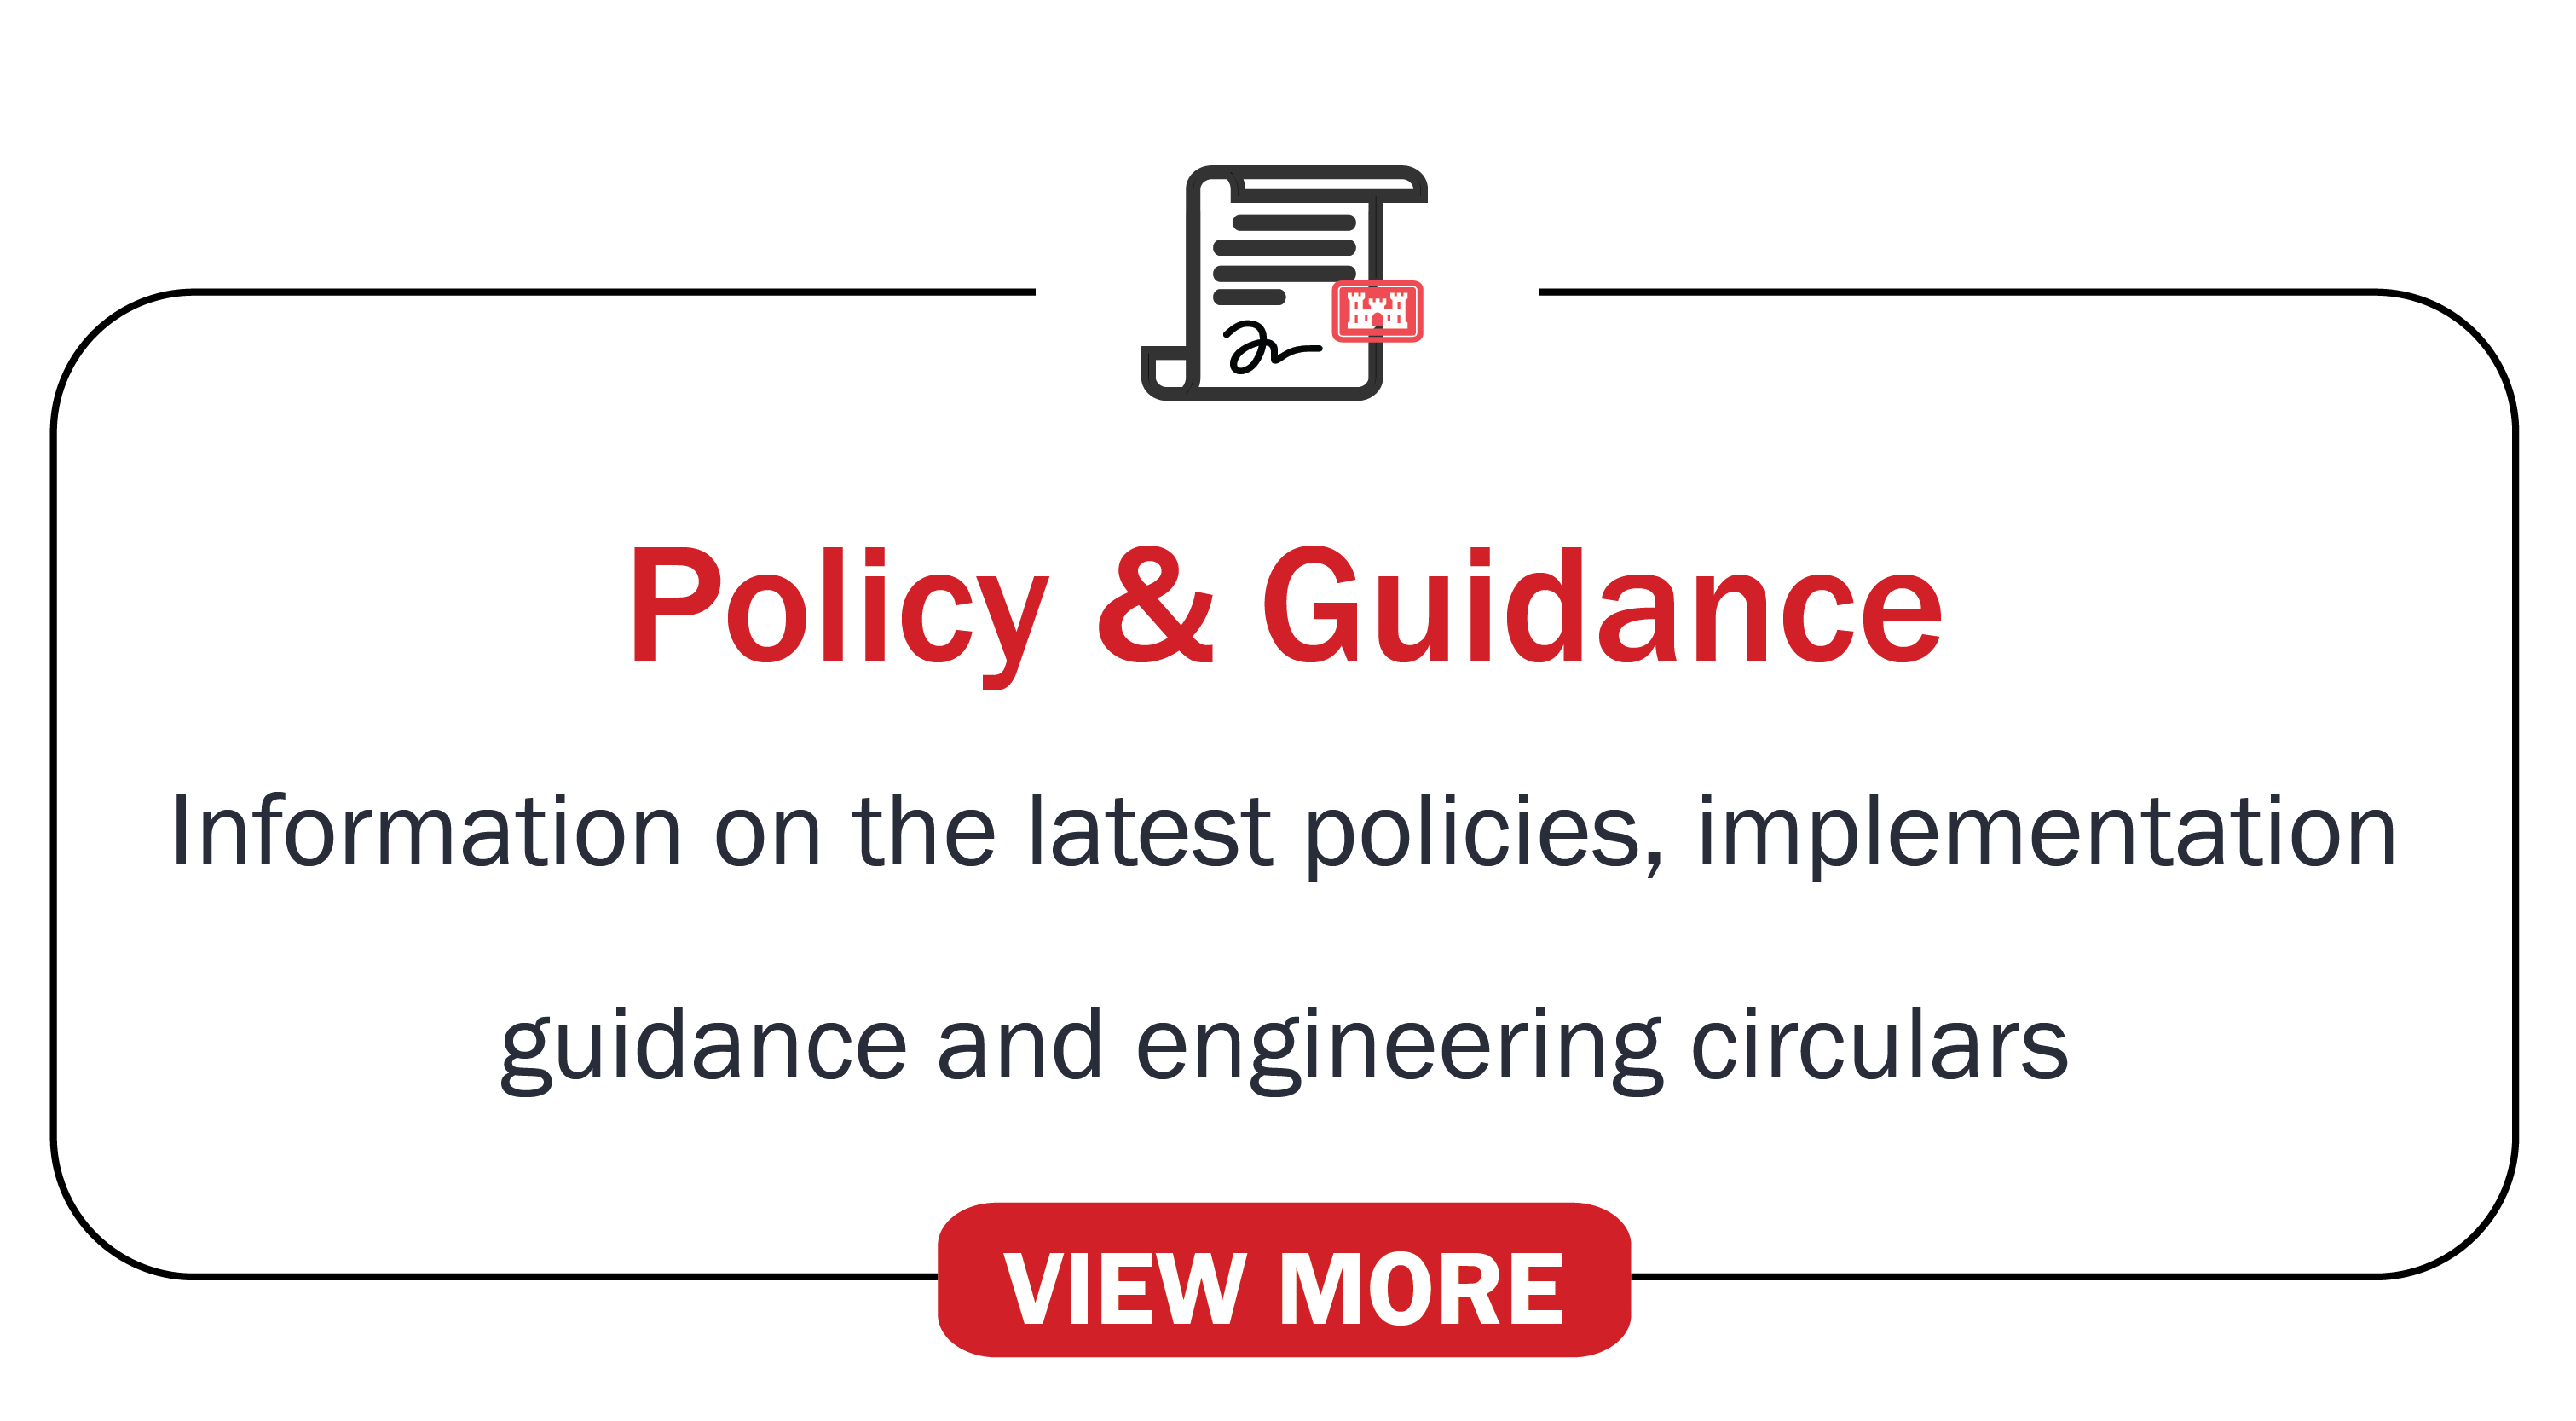 Policy and Guidance: Information on the latest policies, implementation guidance and engineering circulars